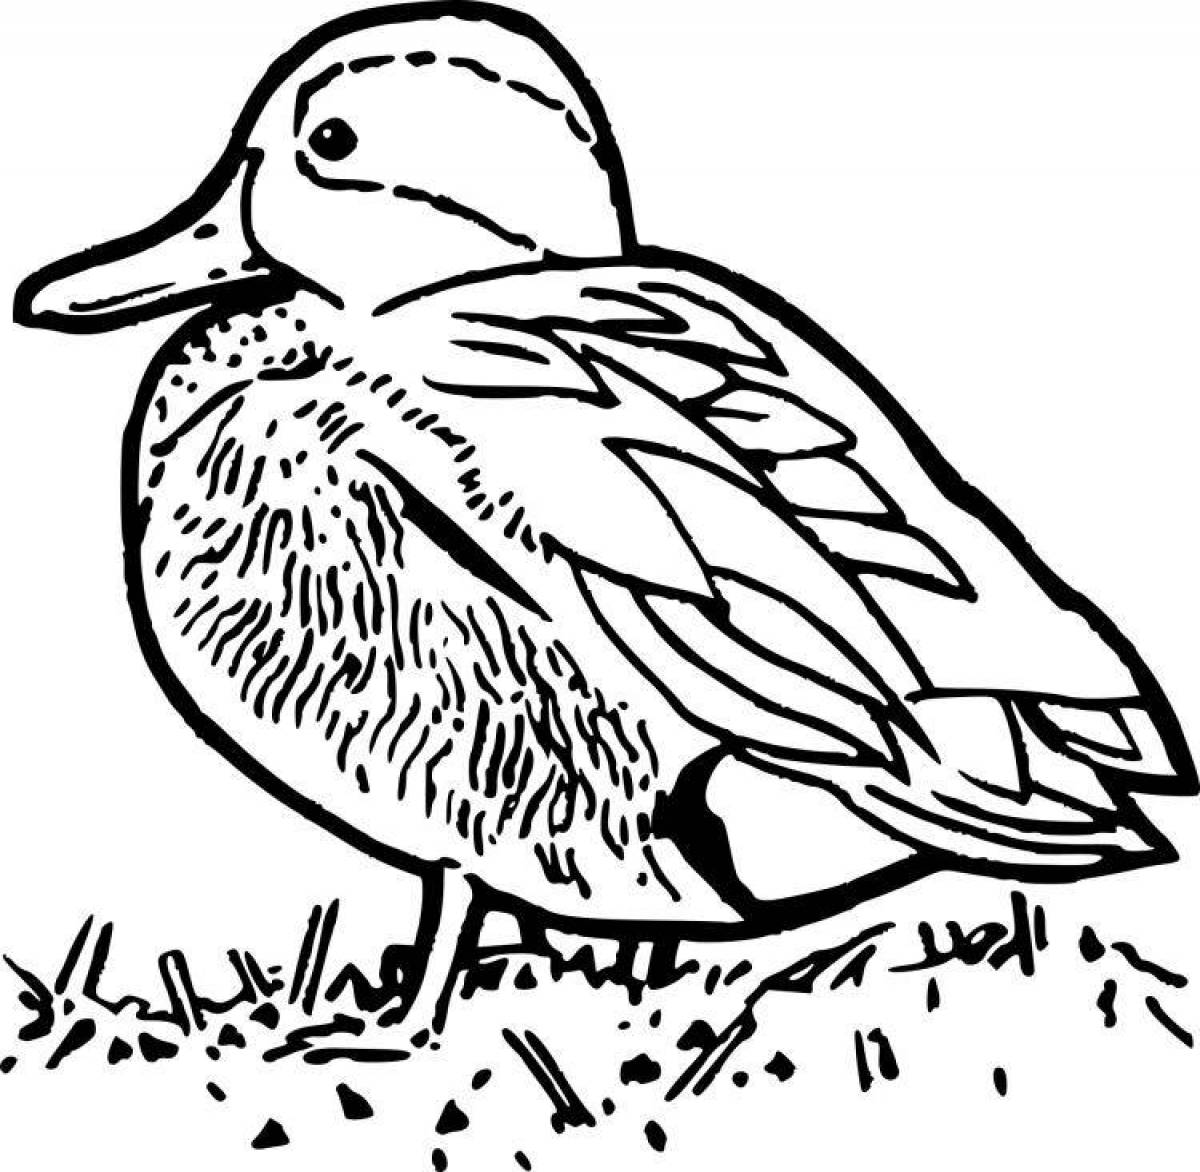 Colouring awesome lanfan duck